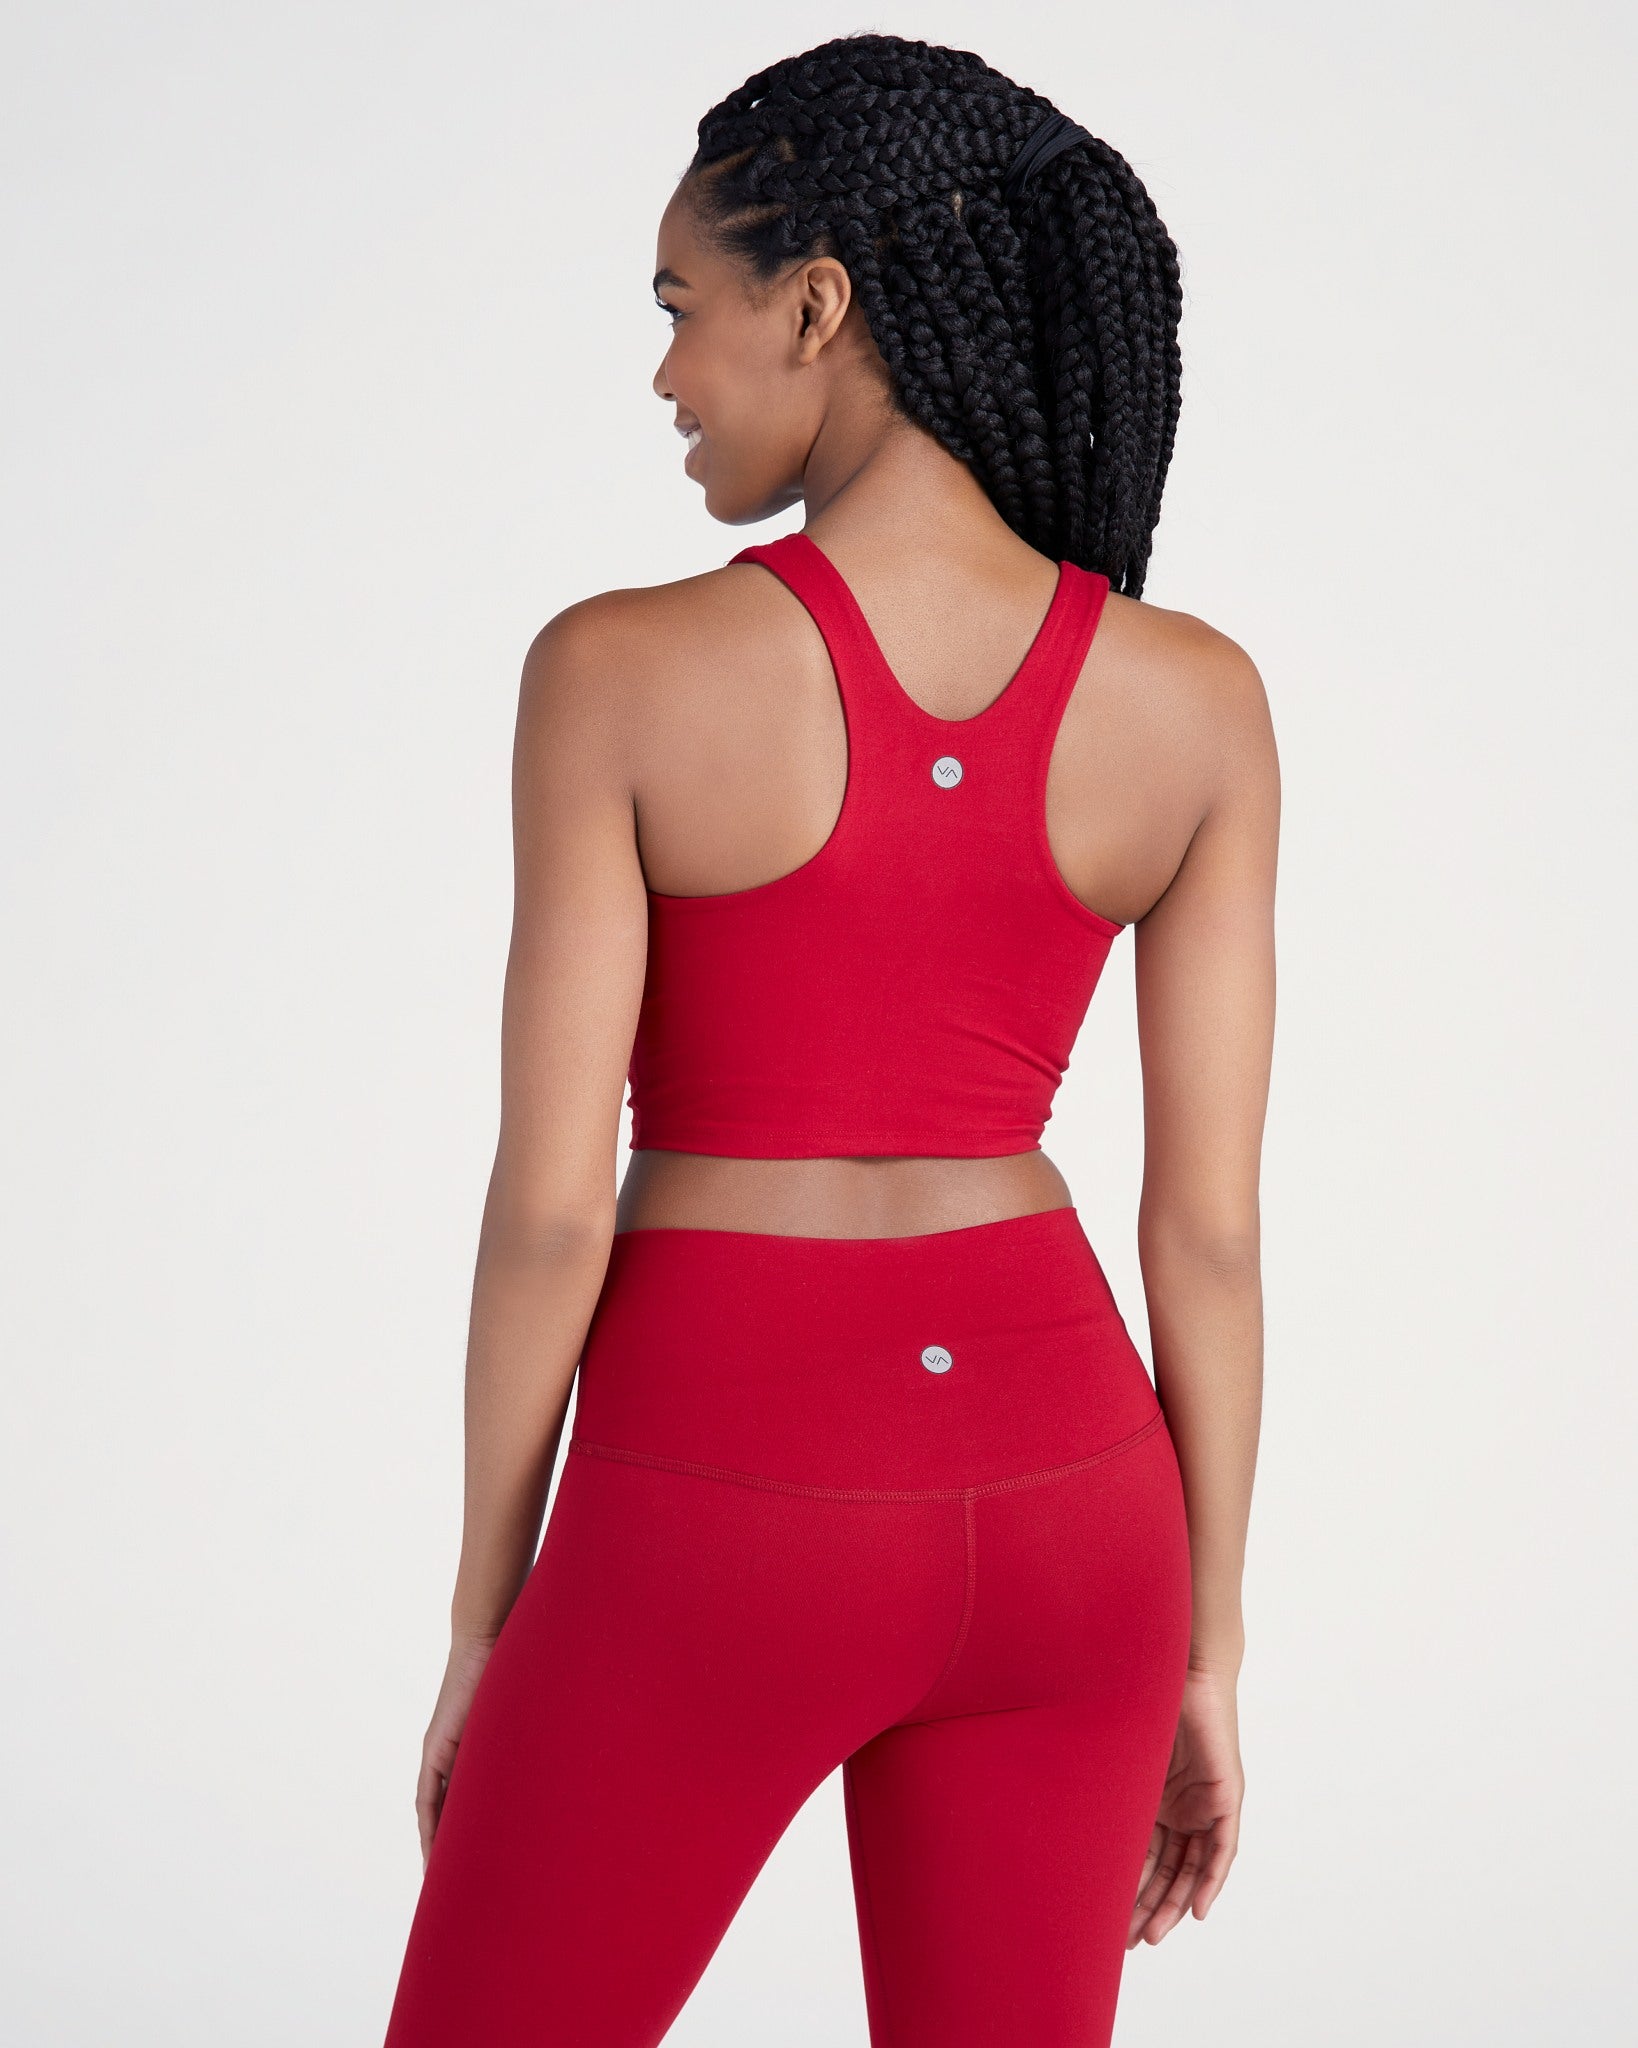 The Gendel Girls™ Expand Athleisure Collection; Debut New Breezies® Seamless  Comfort Bra on QVC® as the Today's Special Value® - 2018-01-12